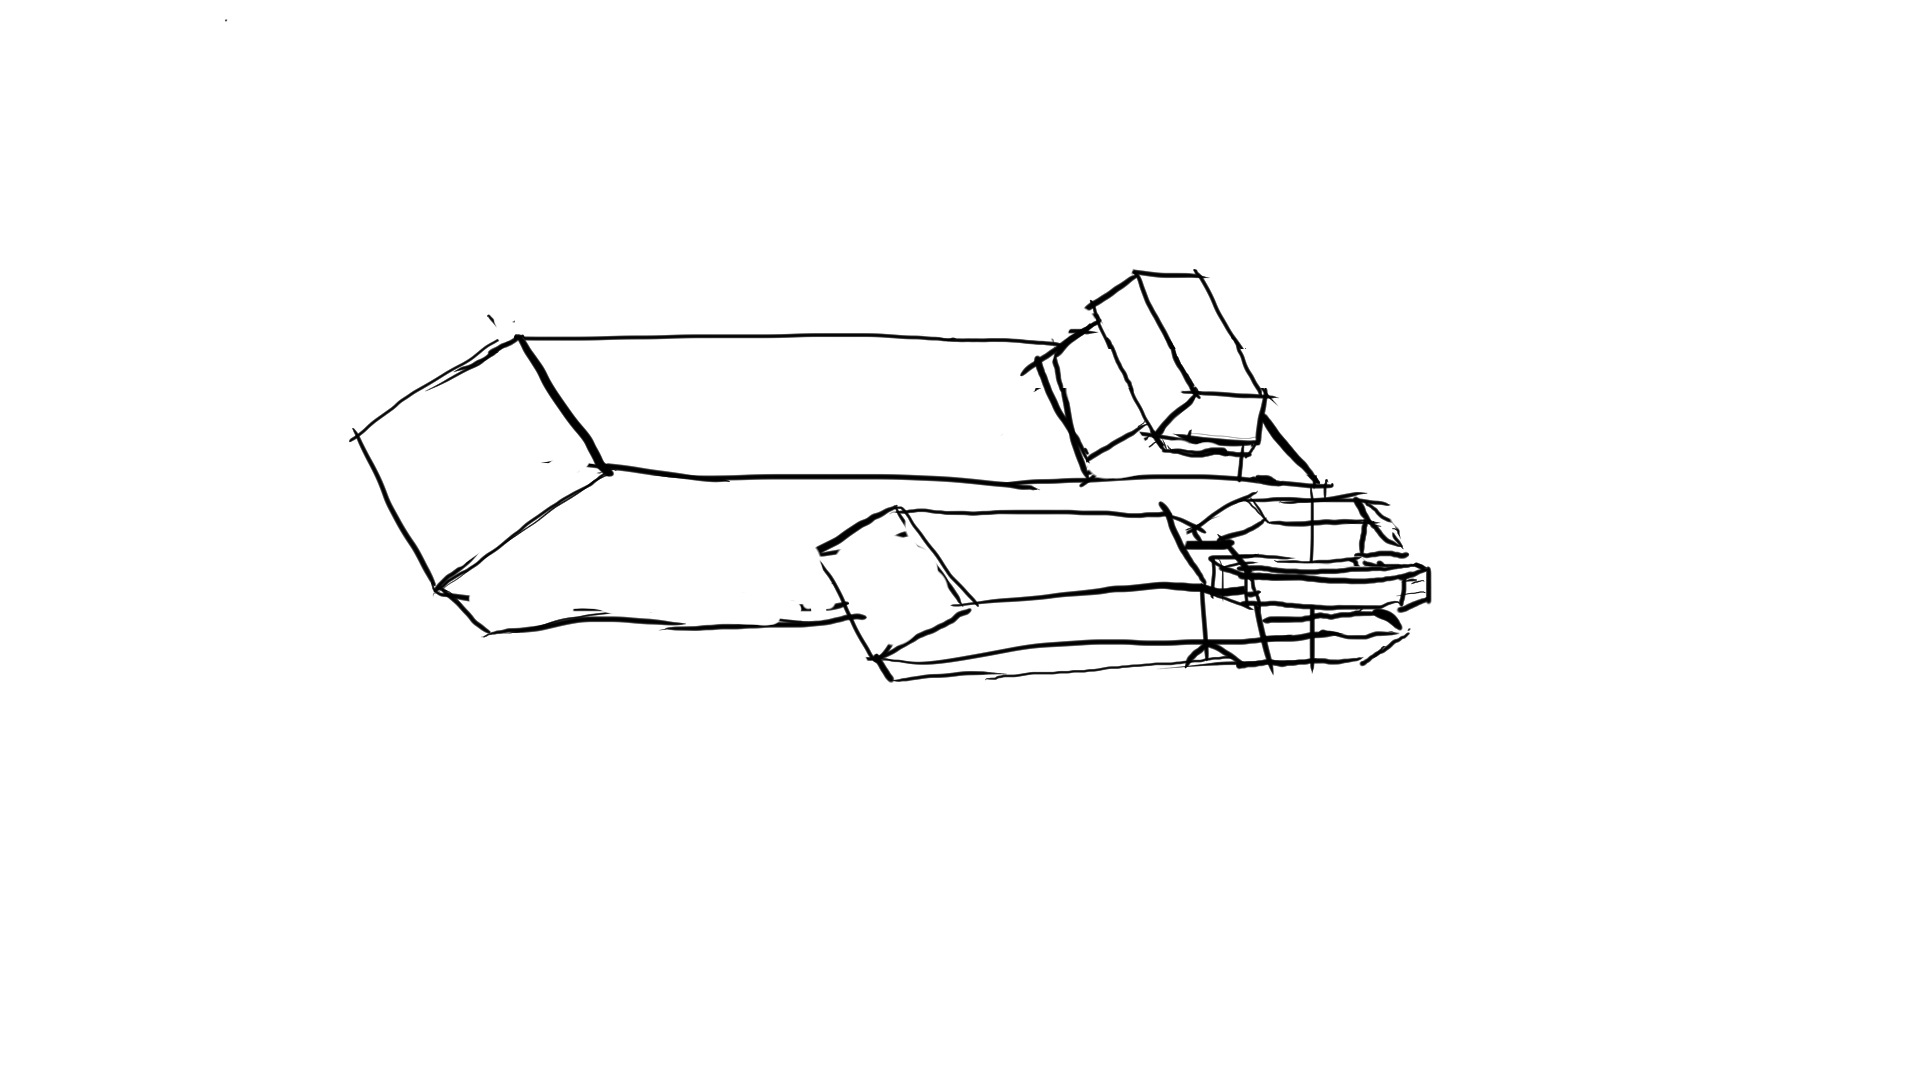 Sketch of a spaceship.